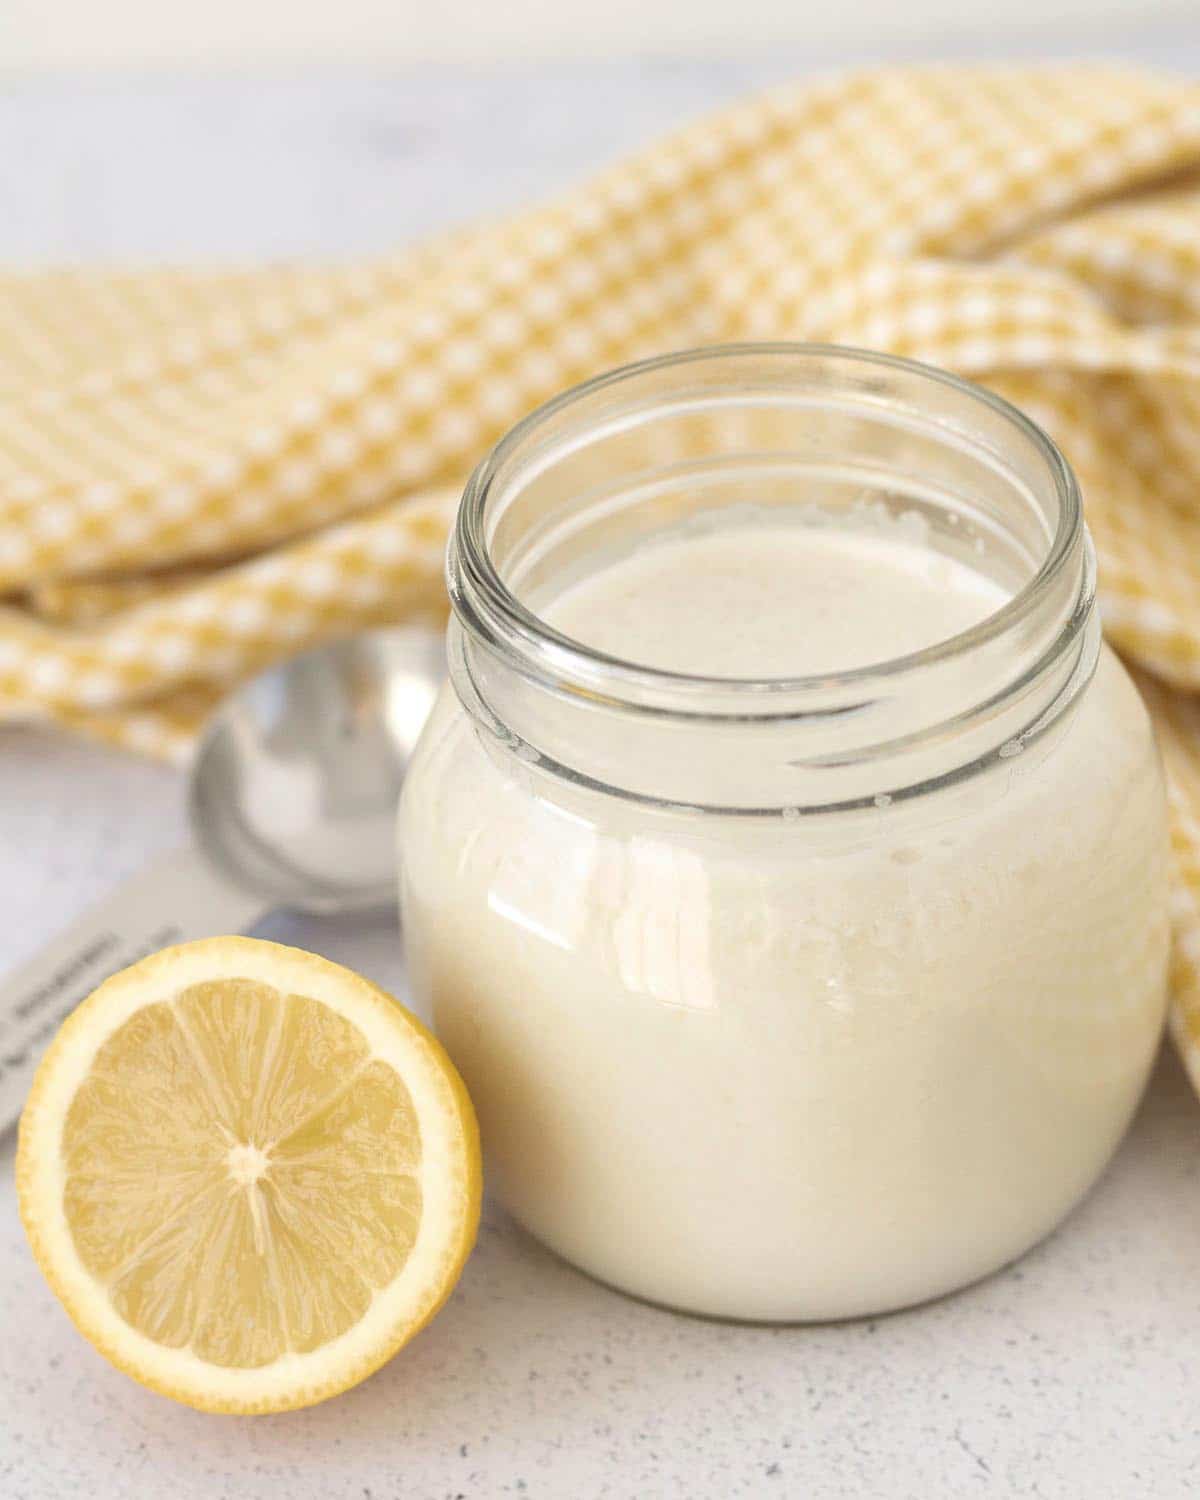 Image shows a jar full of dairy-free buttermilk, a fresh lemon and measuring spoon sits beside the jar.